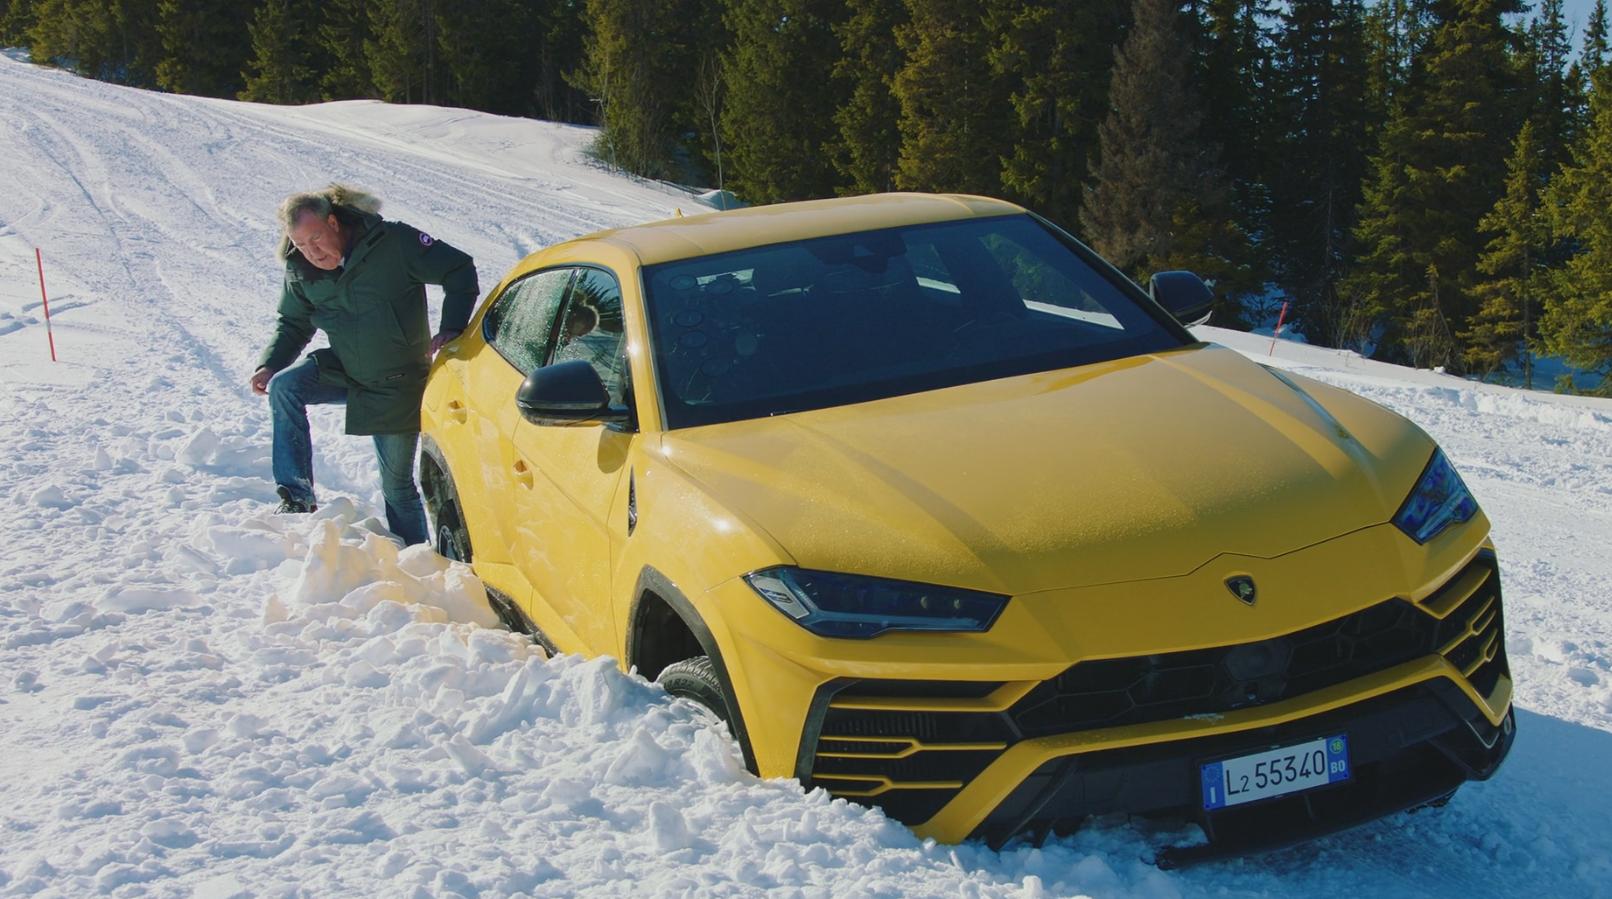 "The Grand Tour" An Itchy Urus